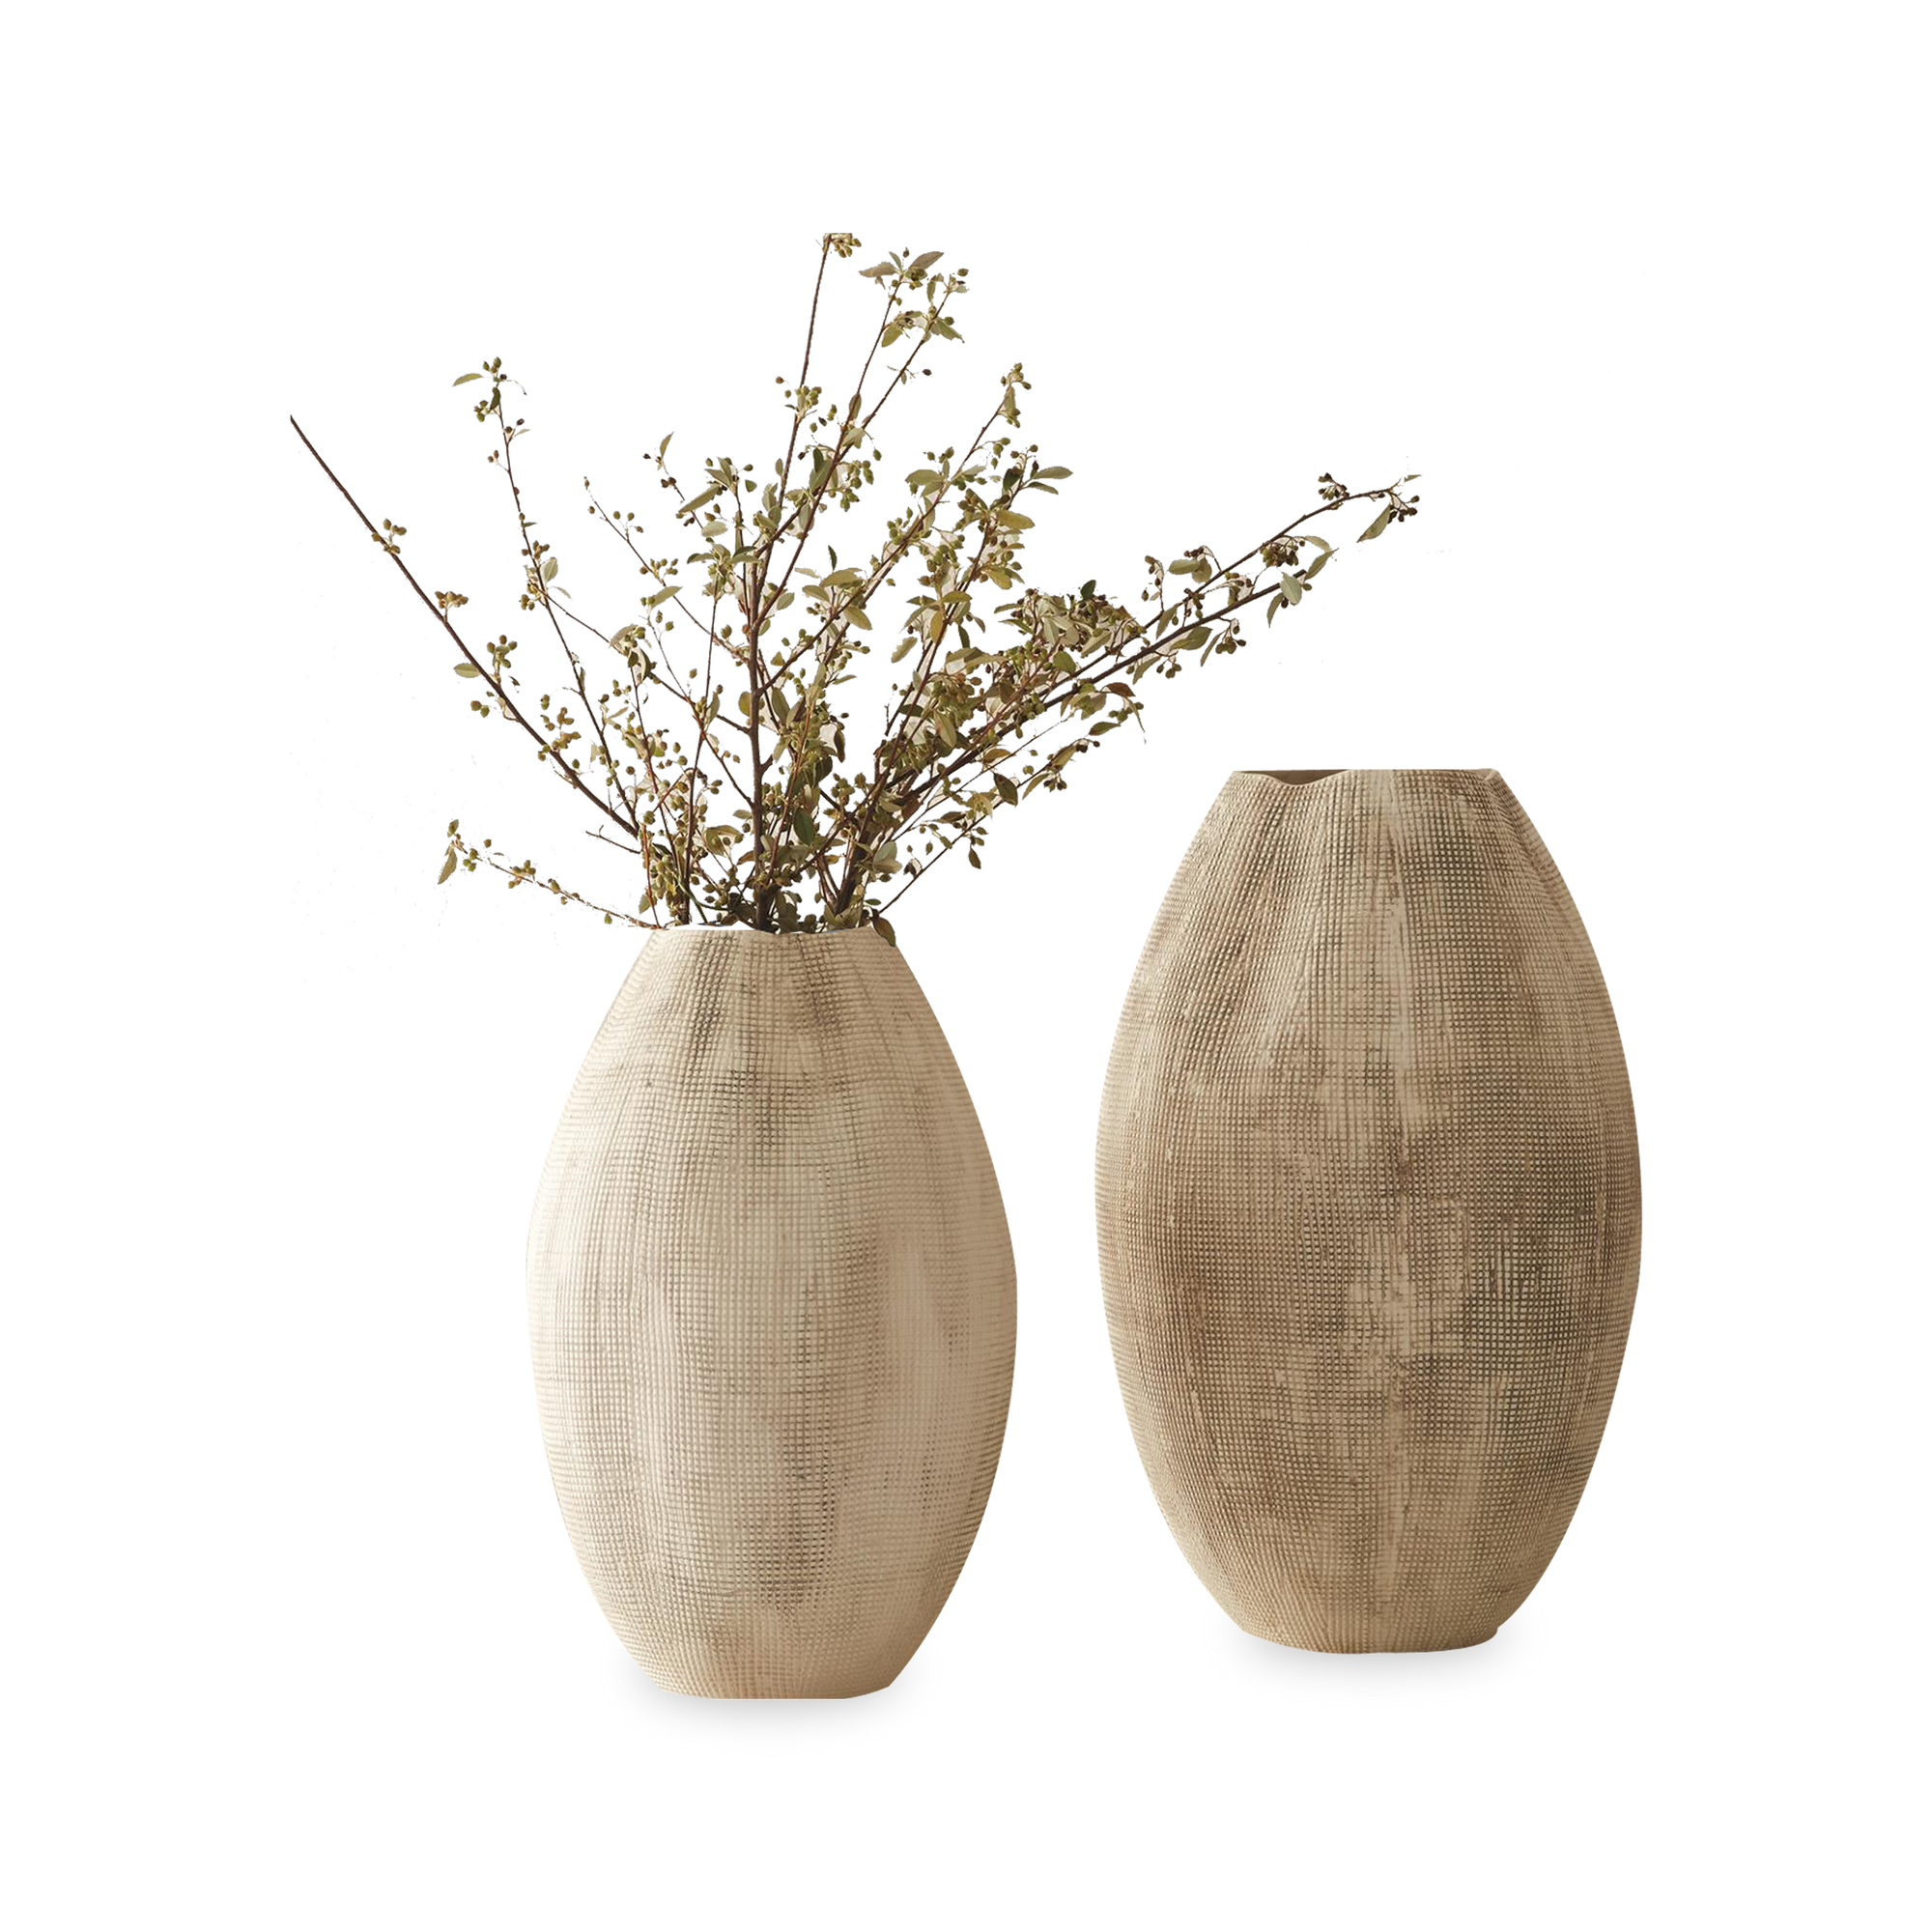 Organic in shape and finish, the Textured Grid Vases feature a grid like texture, adding dimensionality to any space.